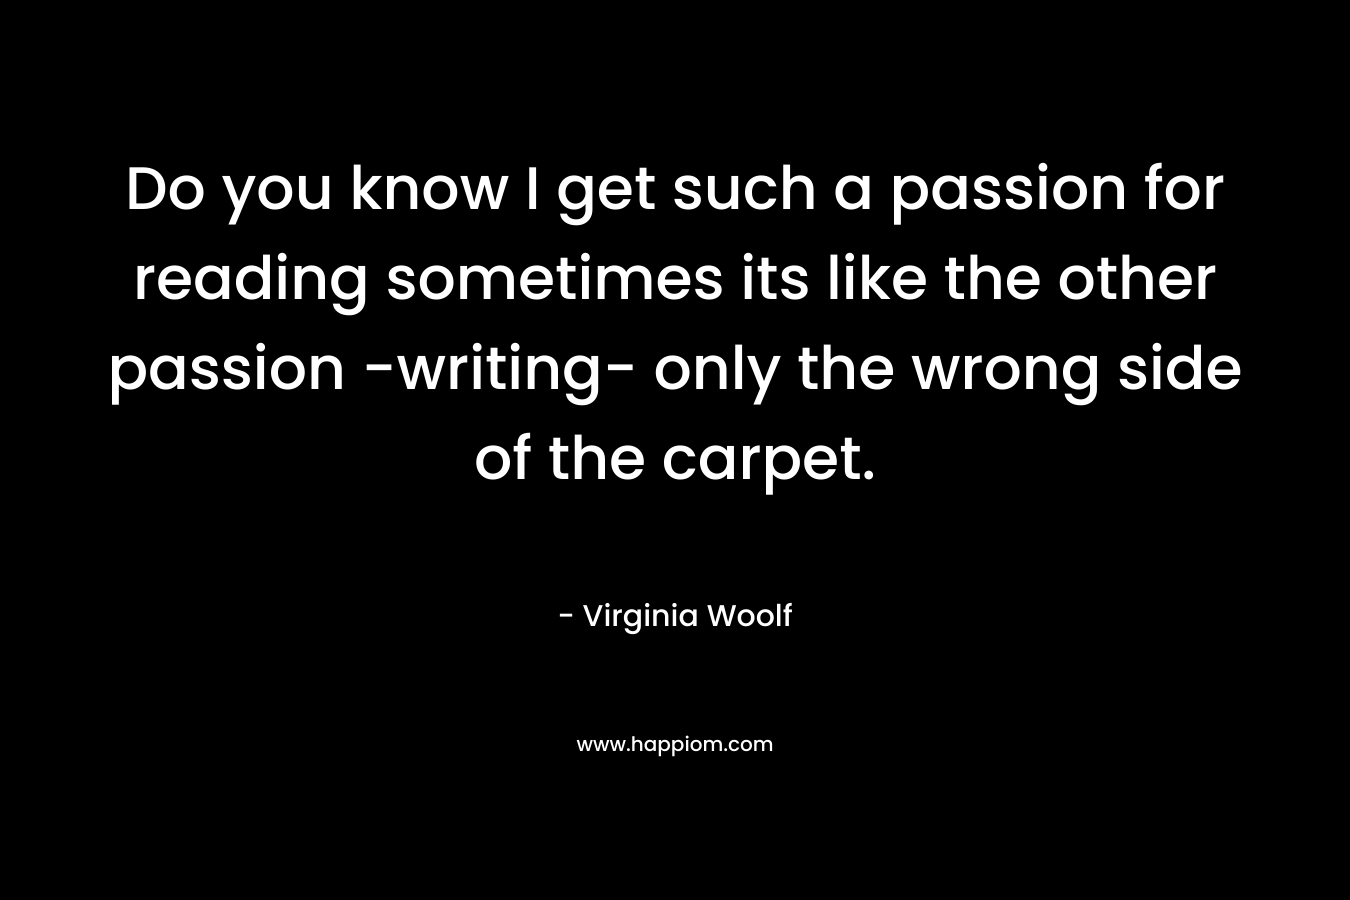 Do you know I get such a passion for reading sometimes its like the other passion -writing- only the wrong side of the carpet.